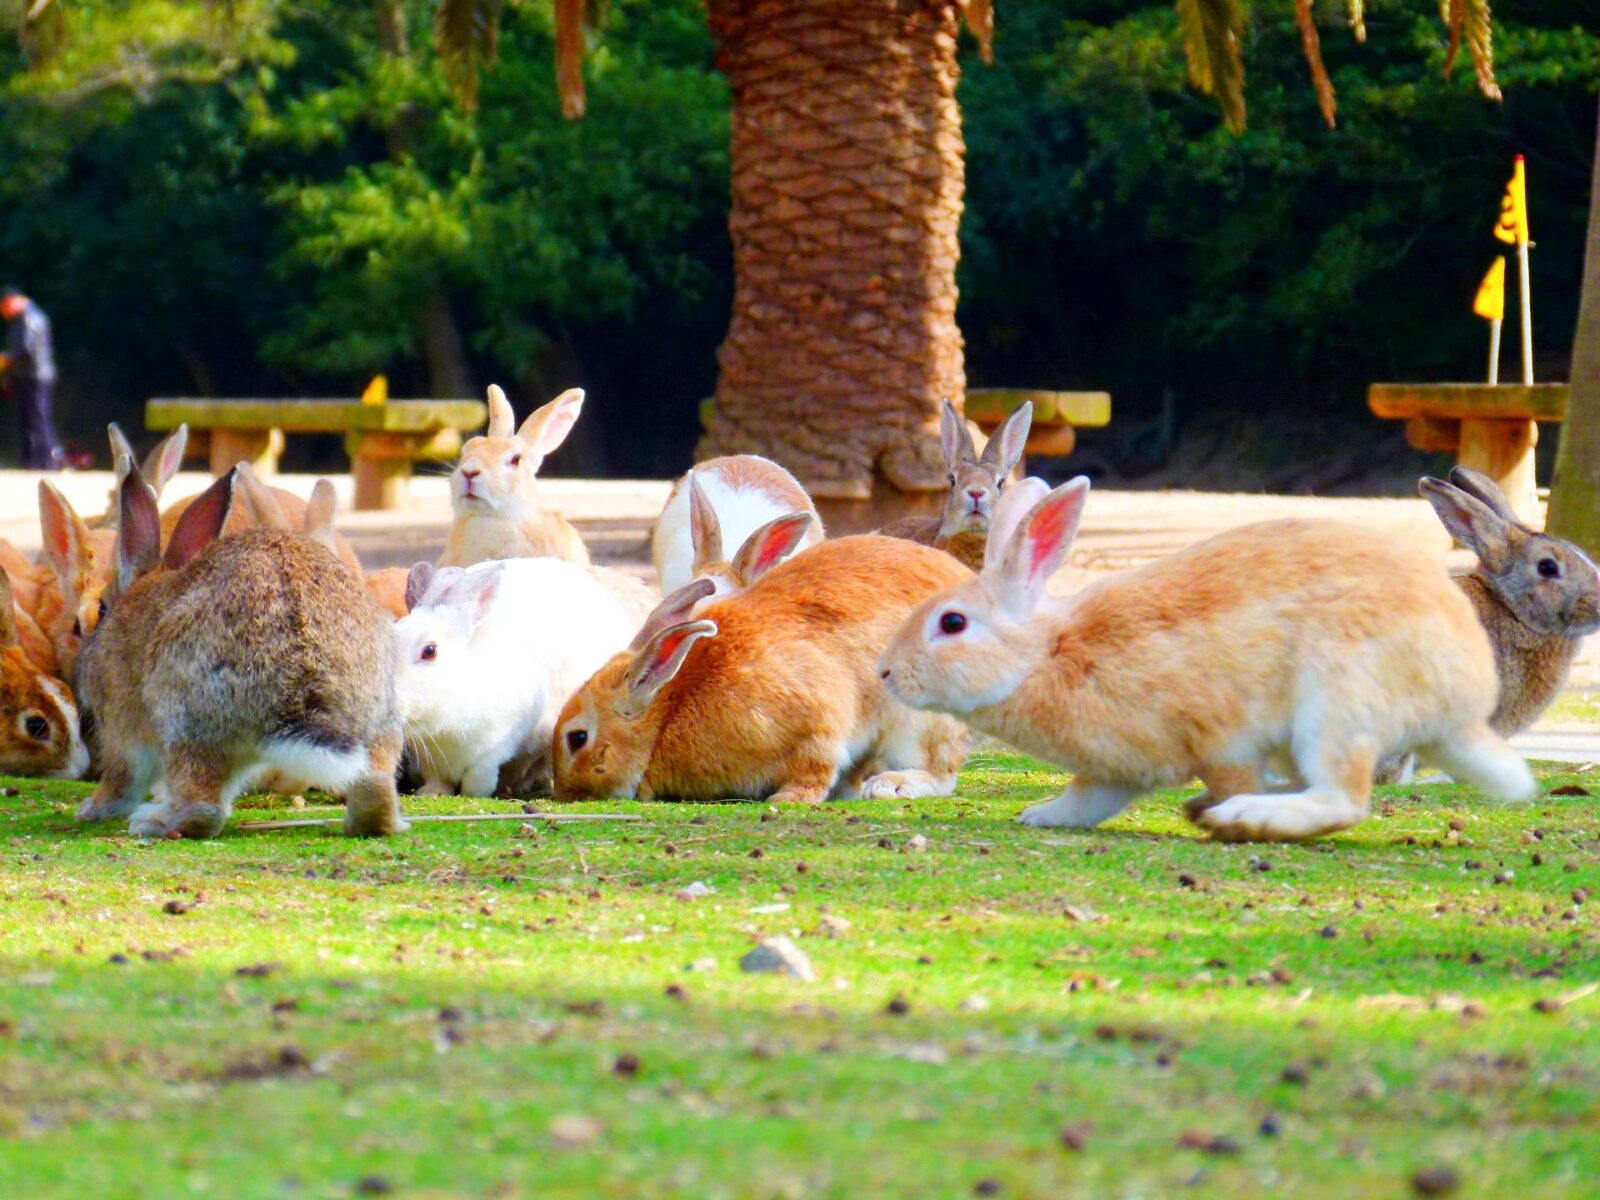 Test Your General Knowledge & See If You Can Ace This True or False Quiz Rabbit Island rabbits